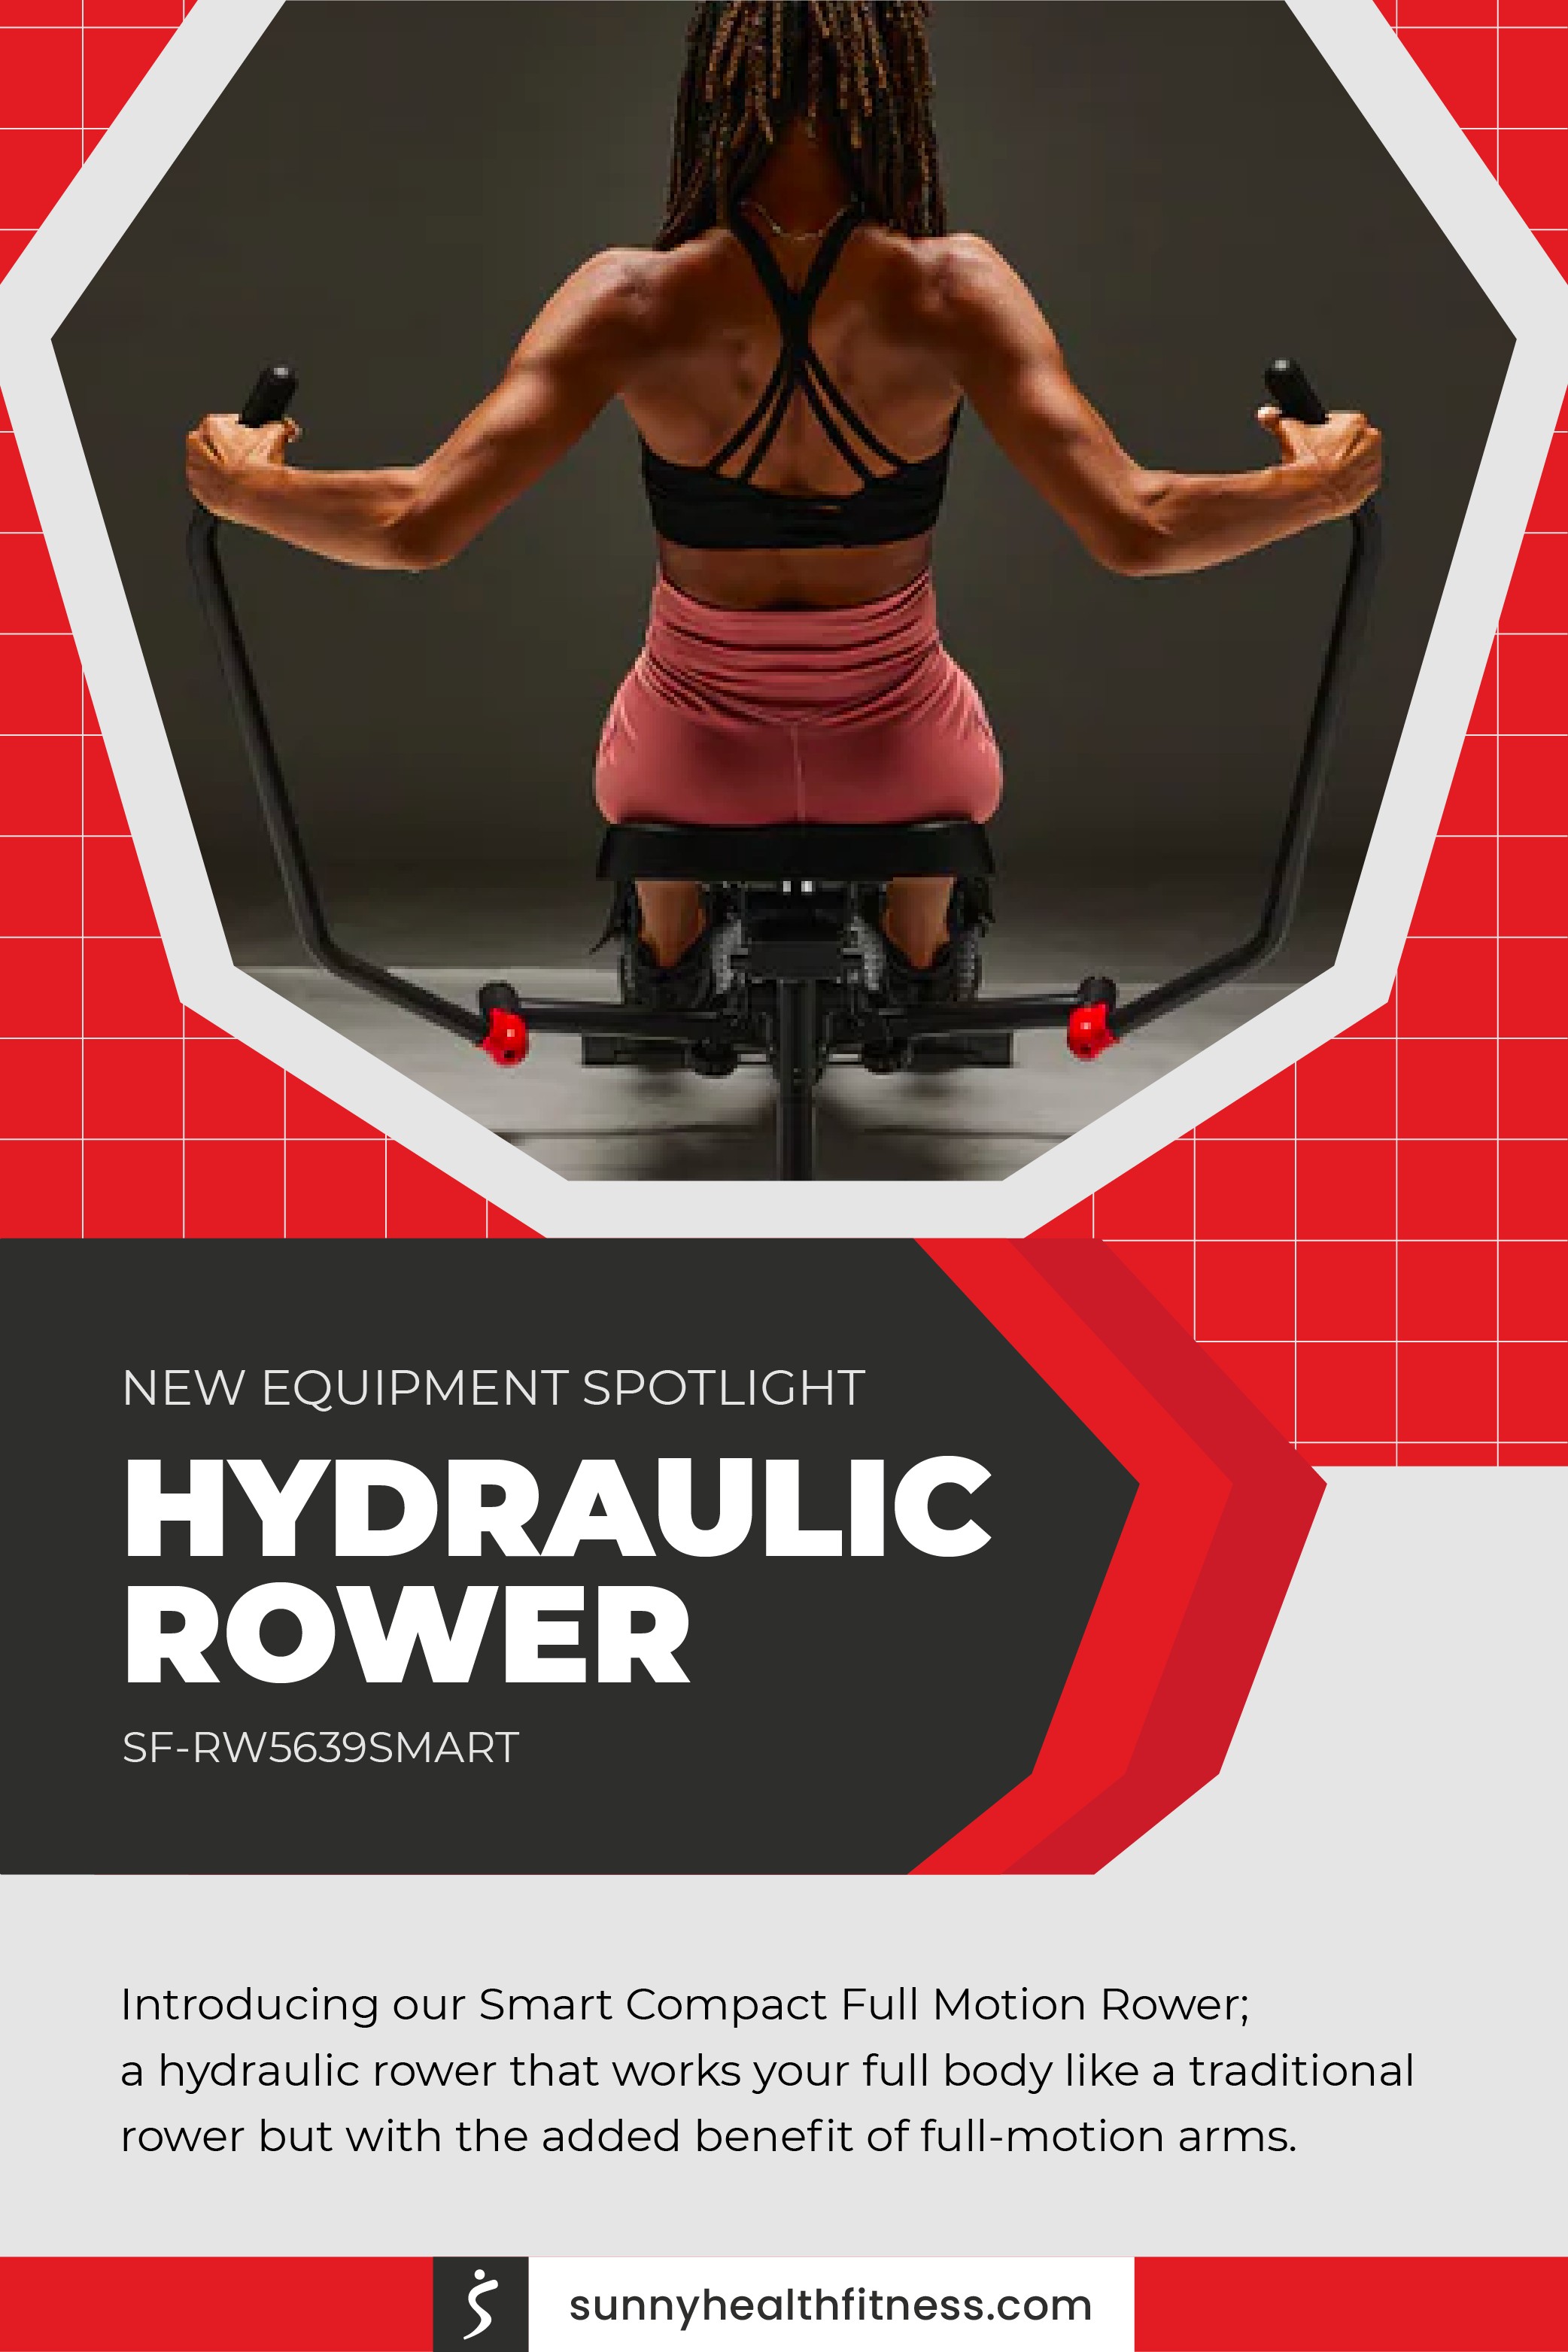 The Hydraulic Rower Infographic